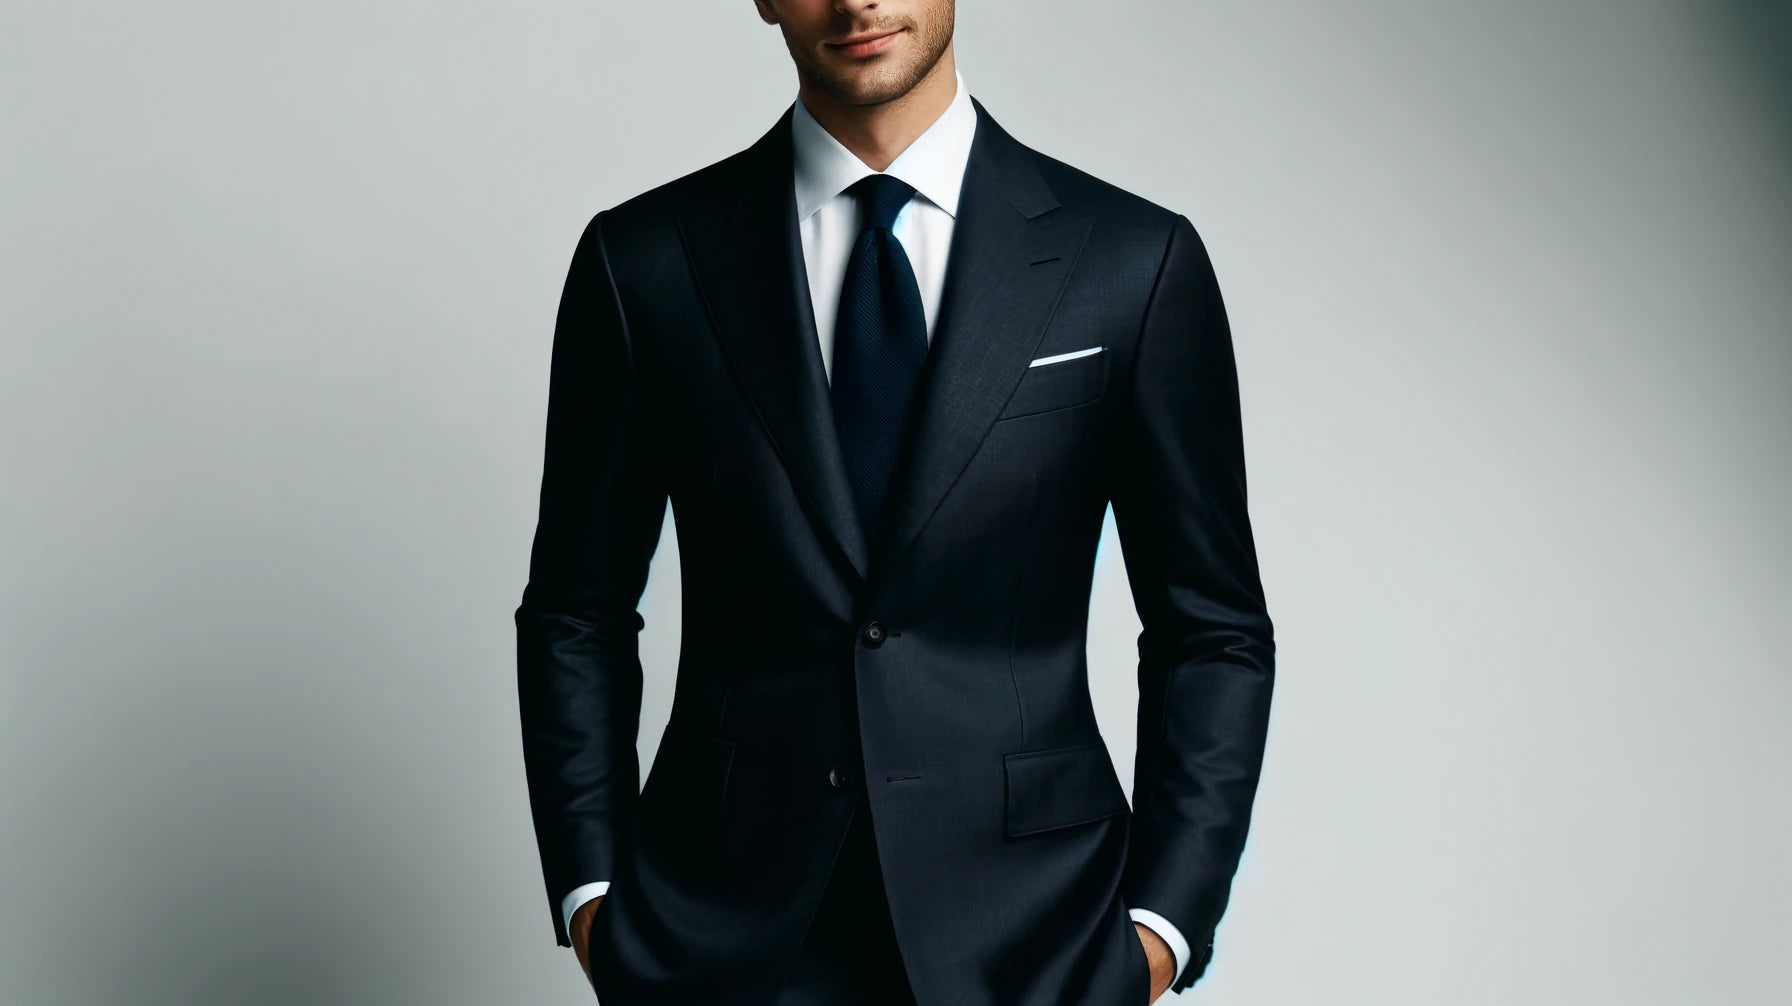 The length of a jacket should cover the seat for a balanced look.